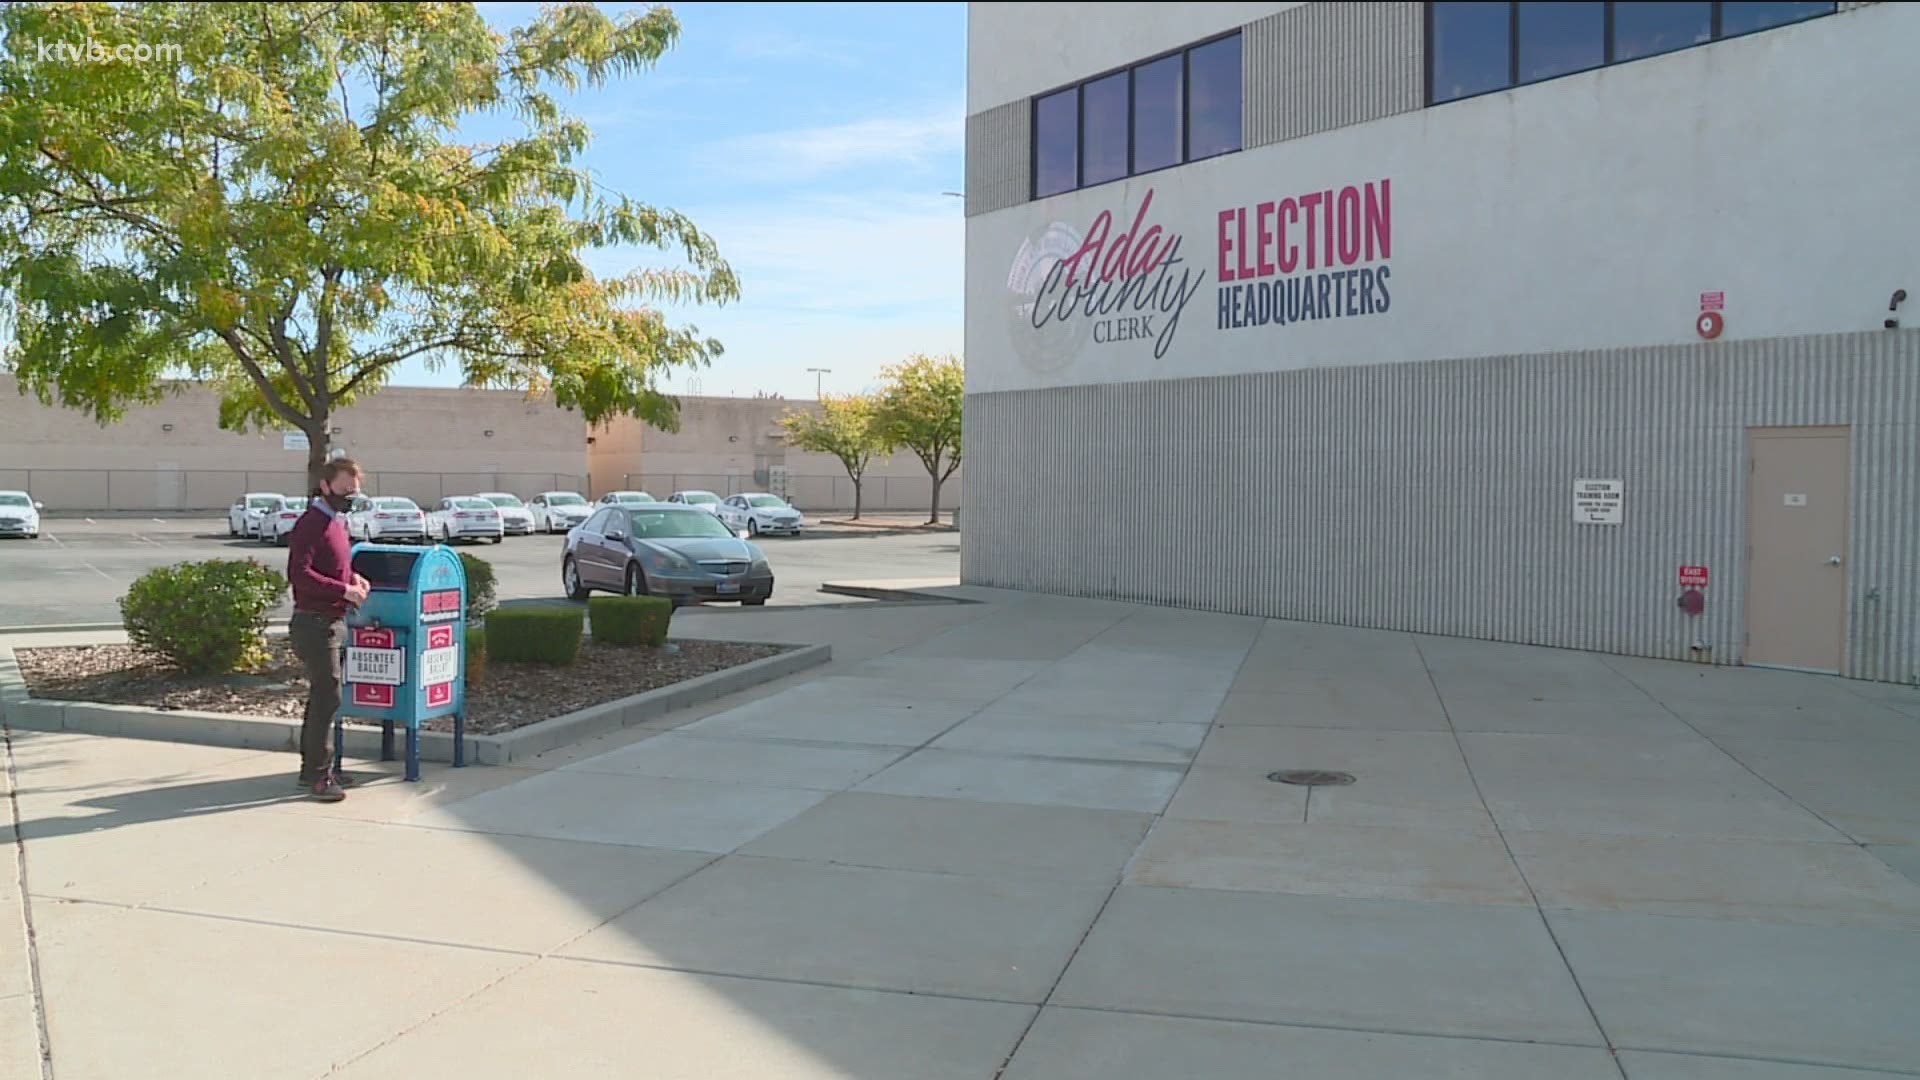 How to track your absentee ballot in Idaho